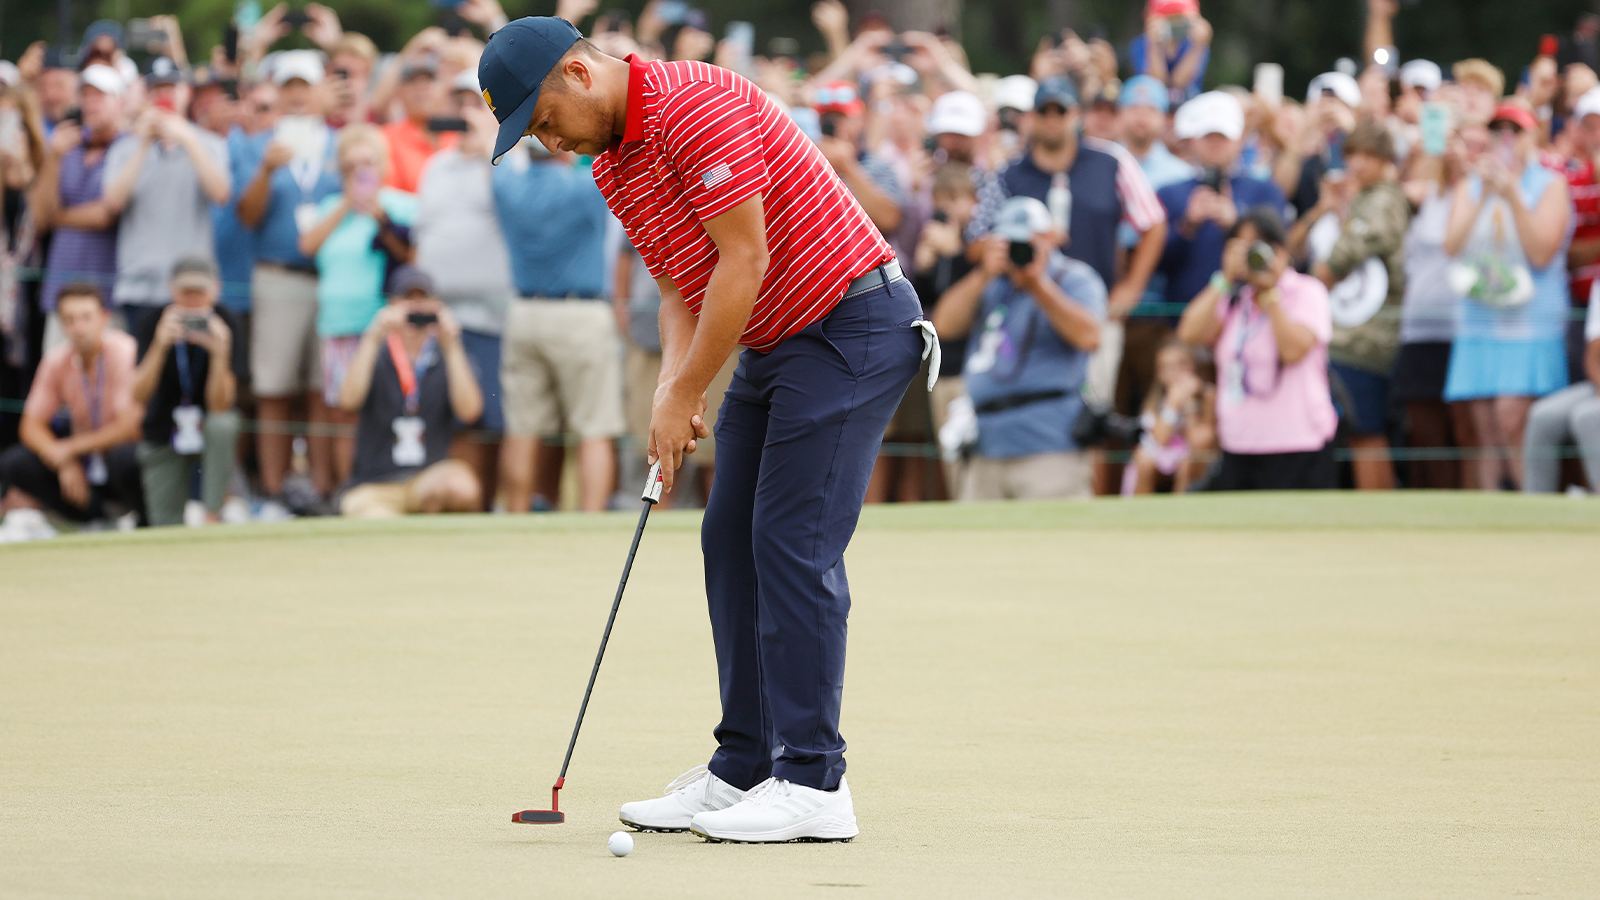  Xander Schauffele of the United States Team putts for the win on the 18th green during Sunday singles matches on day four of the 2022 Presidents Cup at Quail Hollow Country Club on September 25, 2022 in Charlotte, North Carolina. (Photo by Jared C. Tilton/Getty Images)